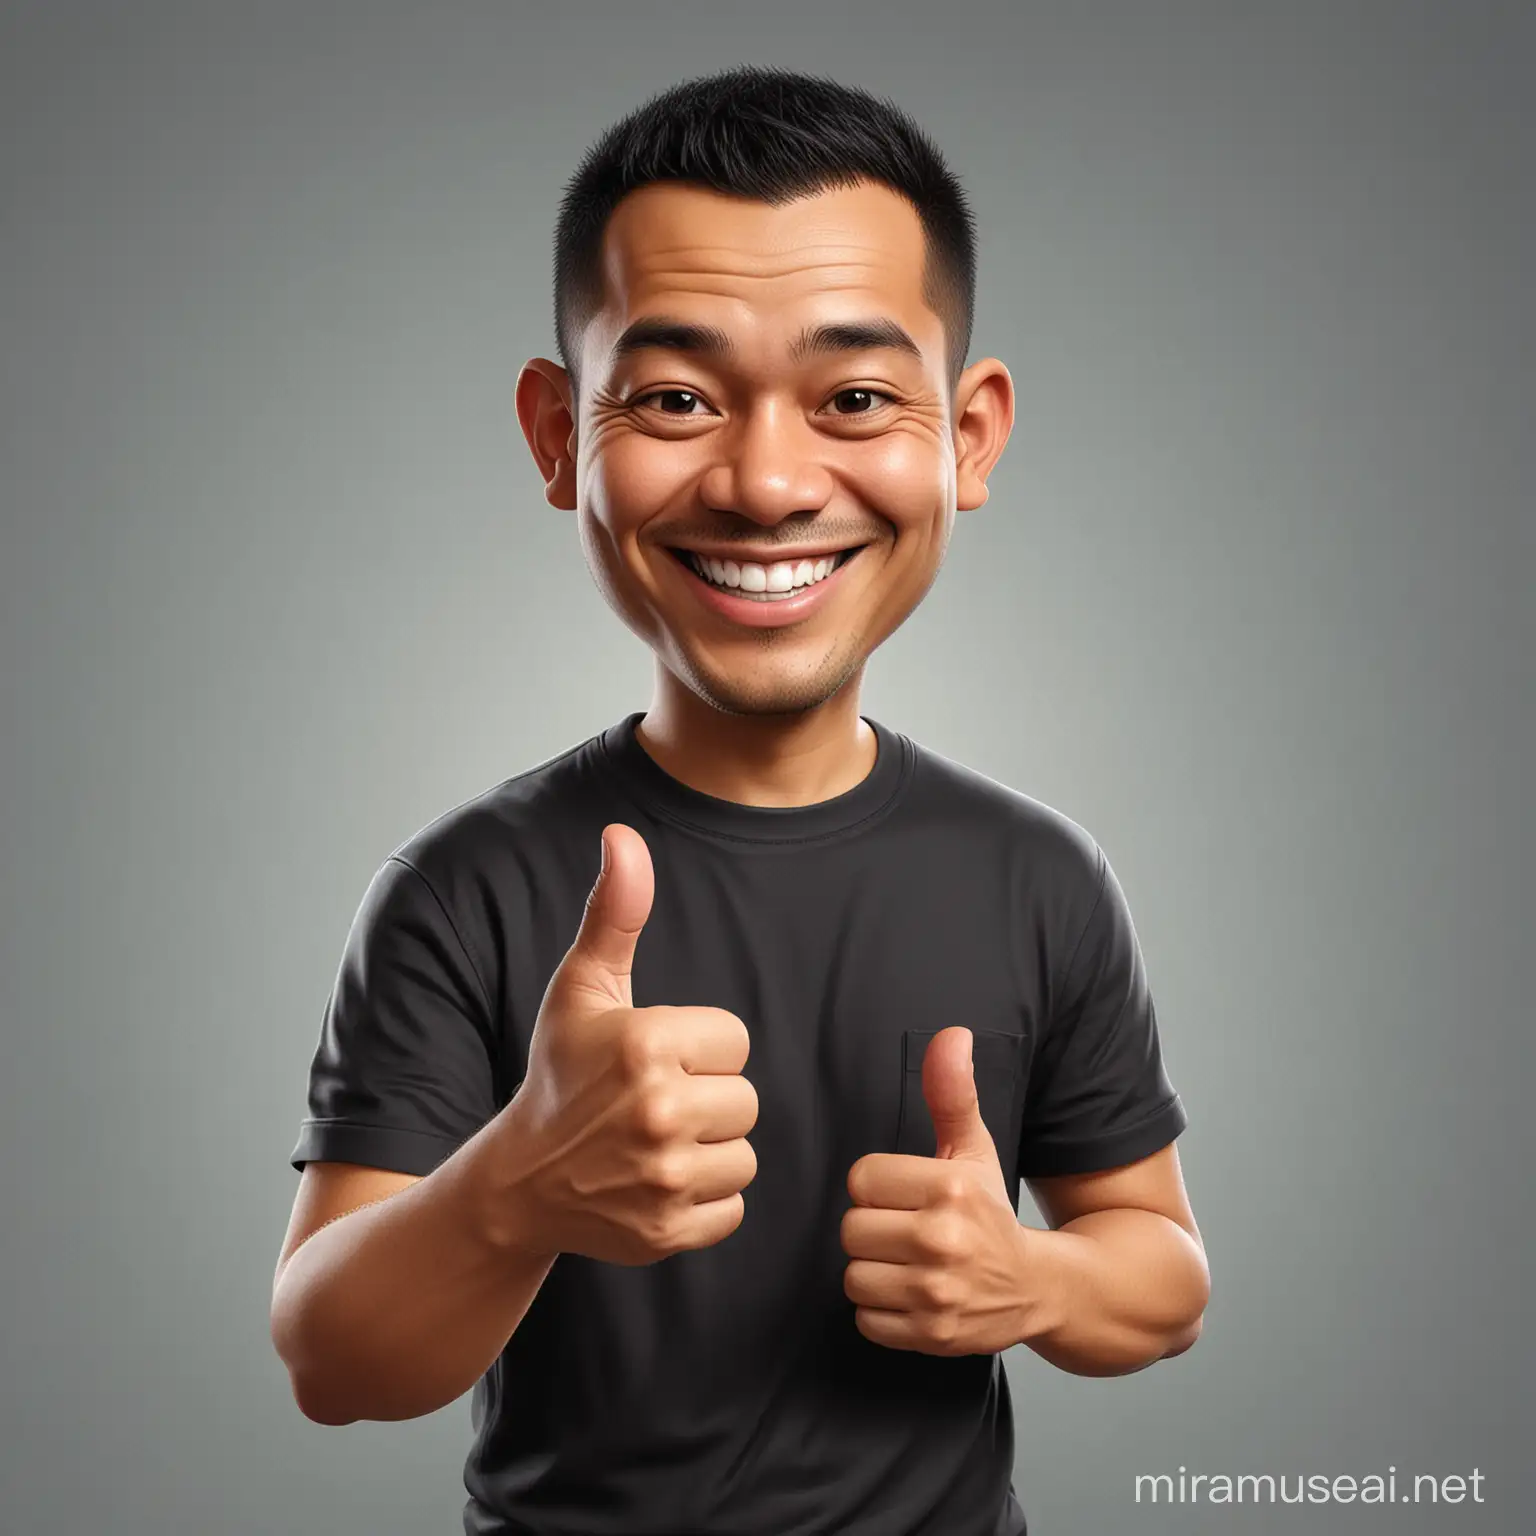 caricature portrait full body, A 39 year old Indonesian man, Neat short hair,buzz cut, Wearing black t-shirt, front view smiling photo, Hand pose giving a thumbs up, realistic.